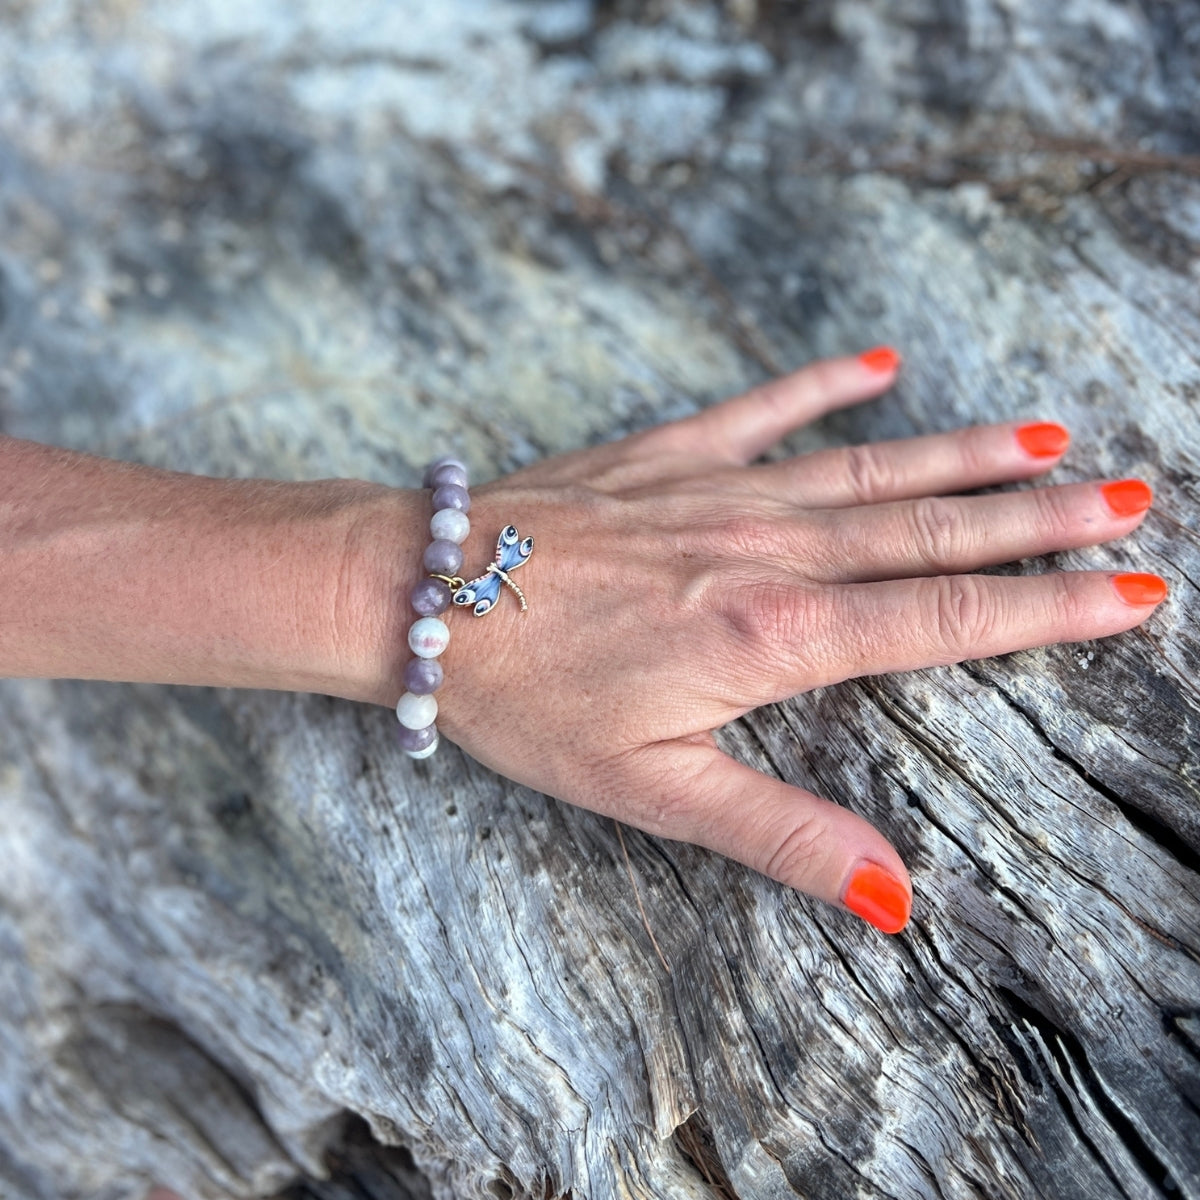 Let the Dragonfly Whispers - Lepidolite Bracelet be your guide, inspiring you to navigate the winds of change with grace, embrace the journey of self-reflection, and reveal your inner light with confidence at every turn.